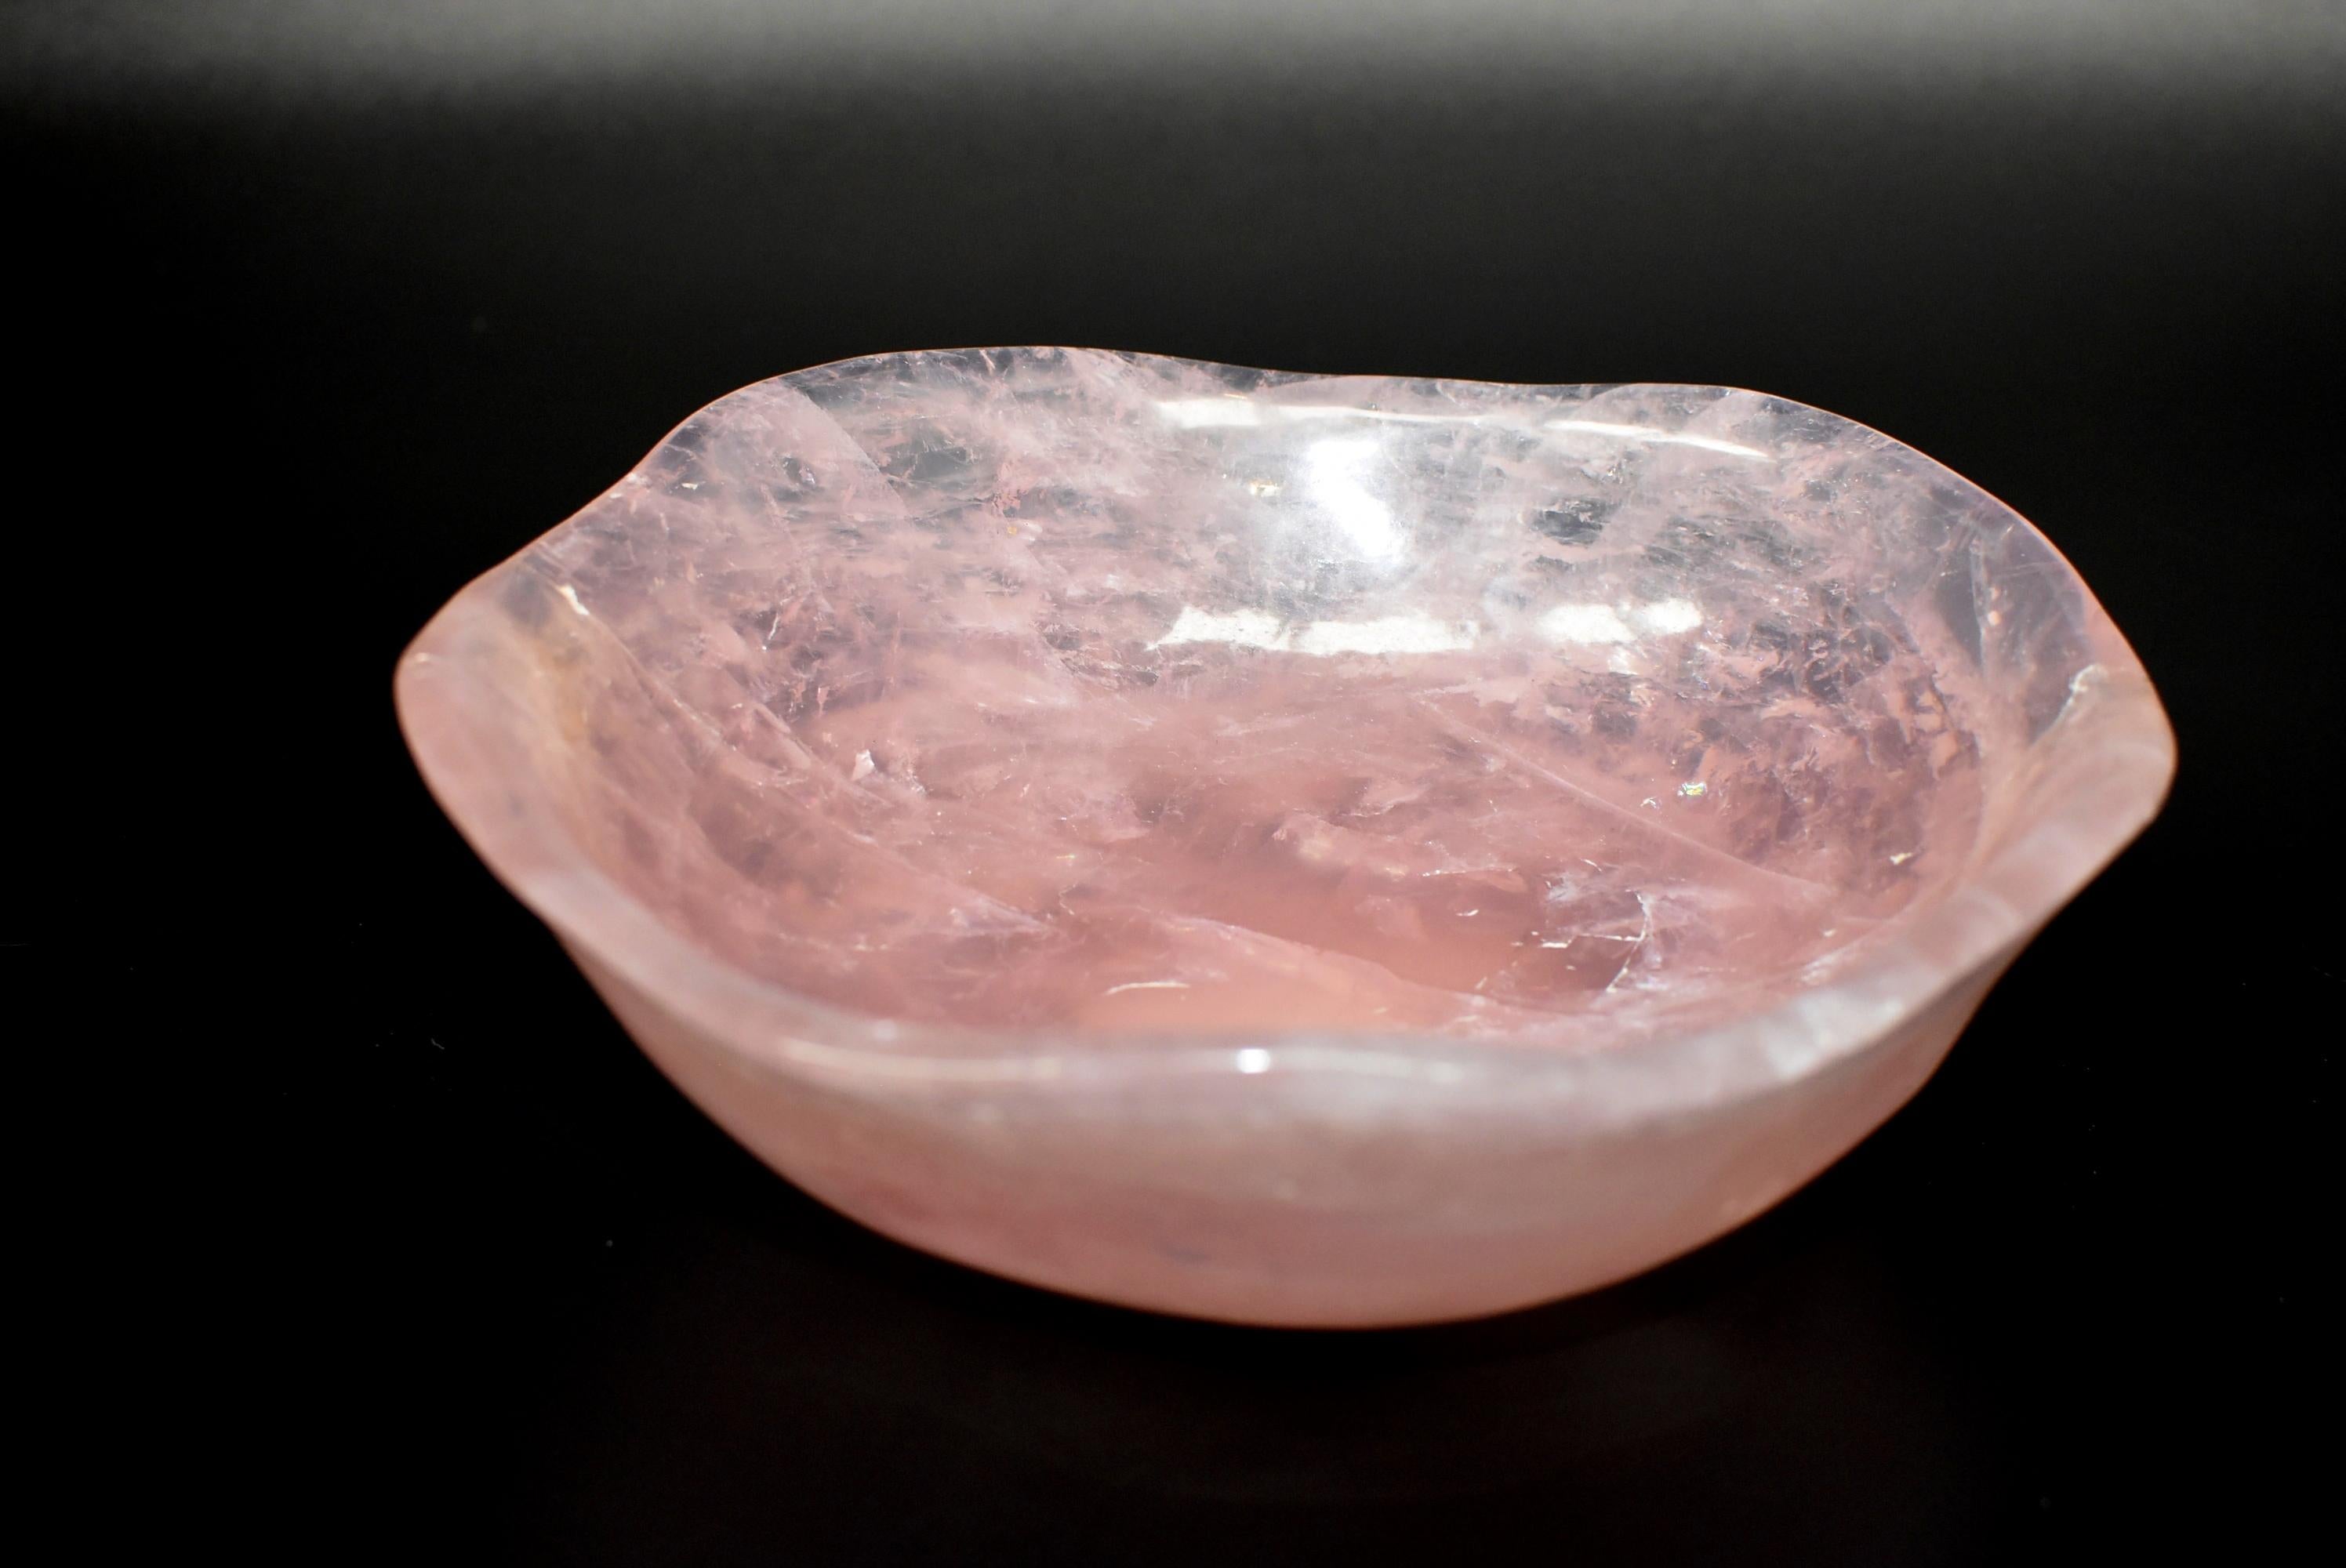 A beautiful extra large natural rose quartz bowl. Perfectly smooth with organic free flow edges. Fantastic translucency. Gorgeous pale pink color. Rose quartz attracts love and maintains it. It is also used to raise self-esteem. Rose Quartz is over